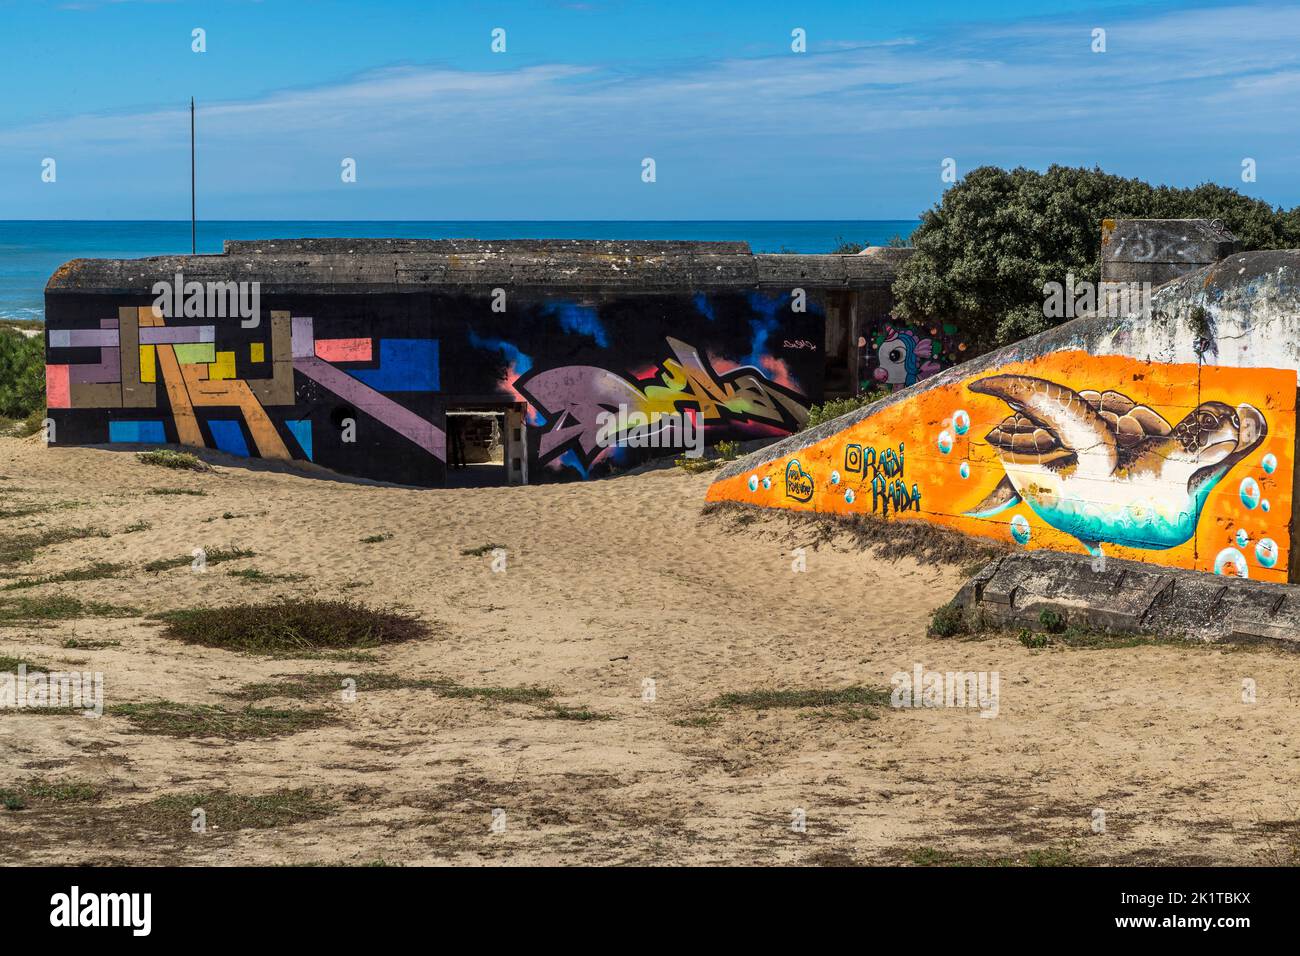 At Les Arros, north of Soulac, the last of the 350 German bunkers from World War II, which formed the Gironde South fortress near Bordeaux, are now colorfully painted.. Les Arros, Soulac, Lesparre-Médoc, France Stock Photo